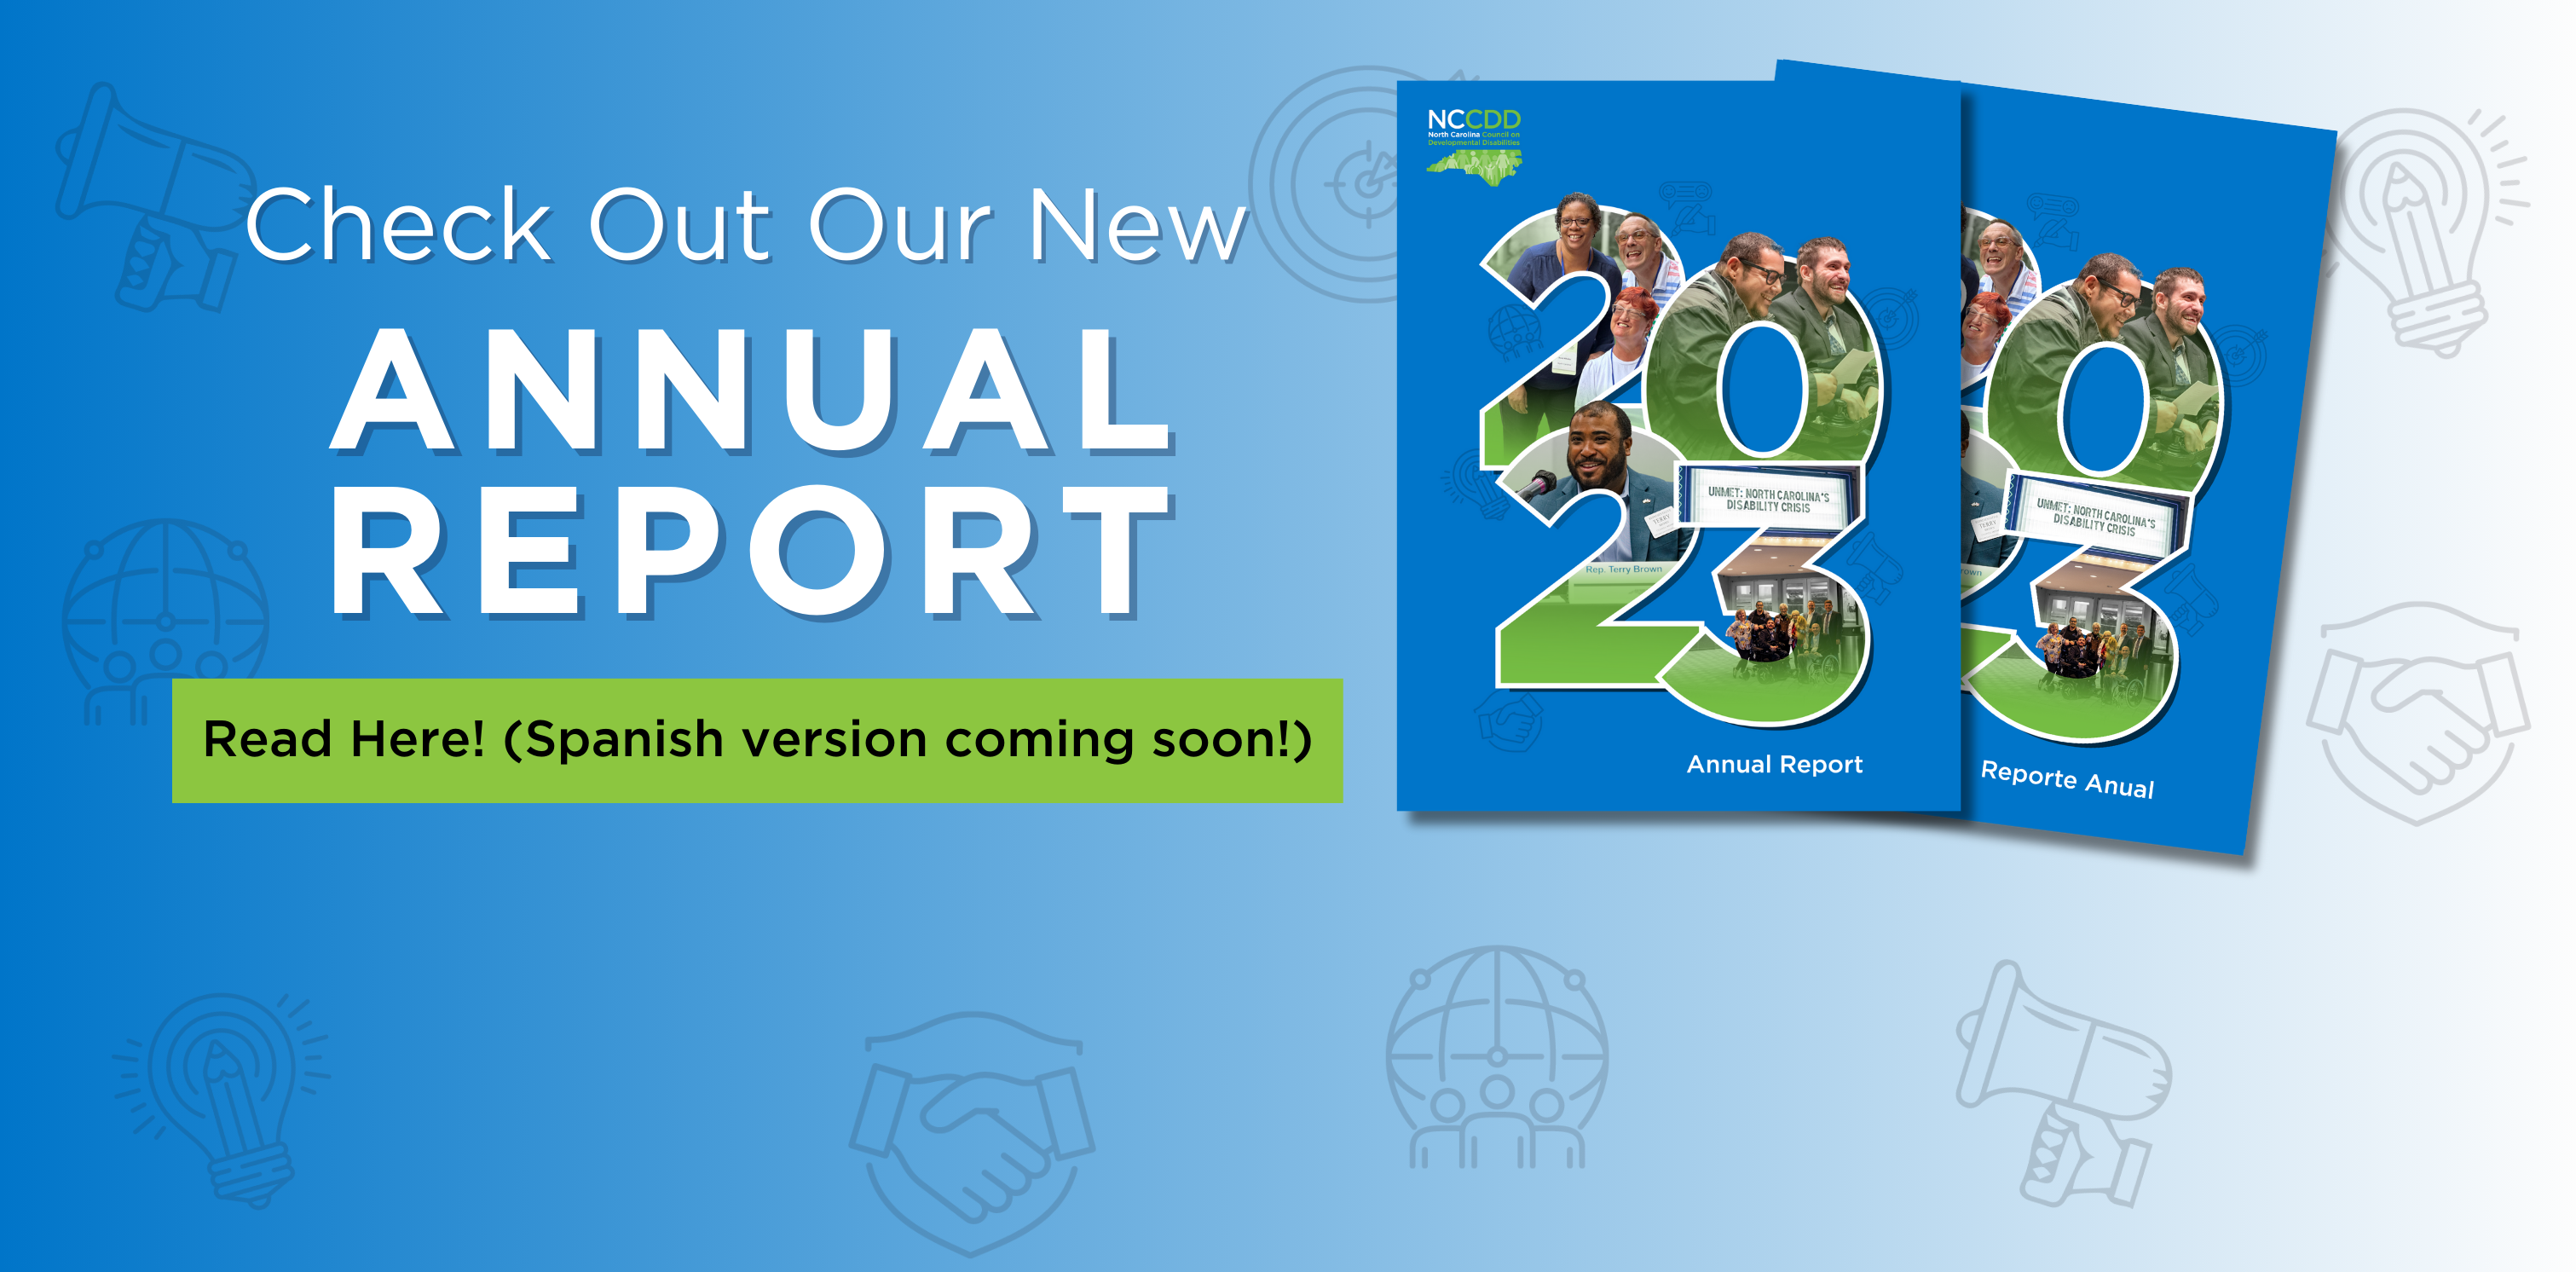 A homepage banner with the words “Check Out Our New 2023 Annual Report Available in English and coming soon in Spanish” on the left side and two pictures of annual reports - one in English and one in Spa